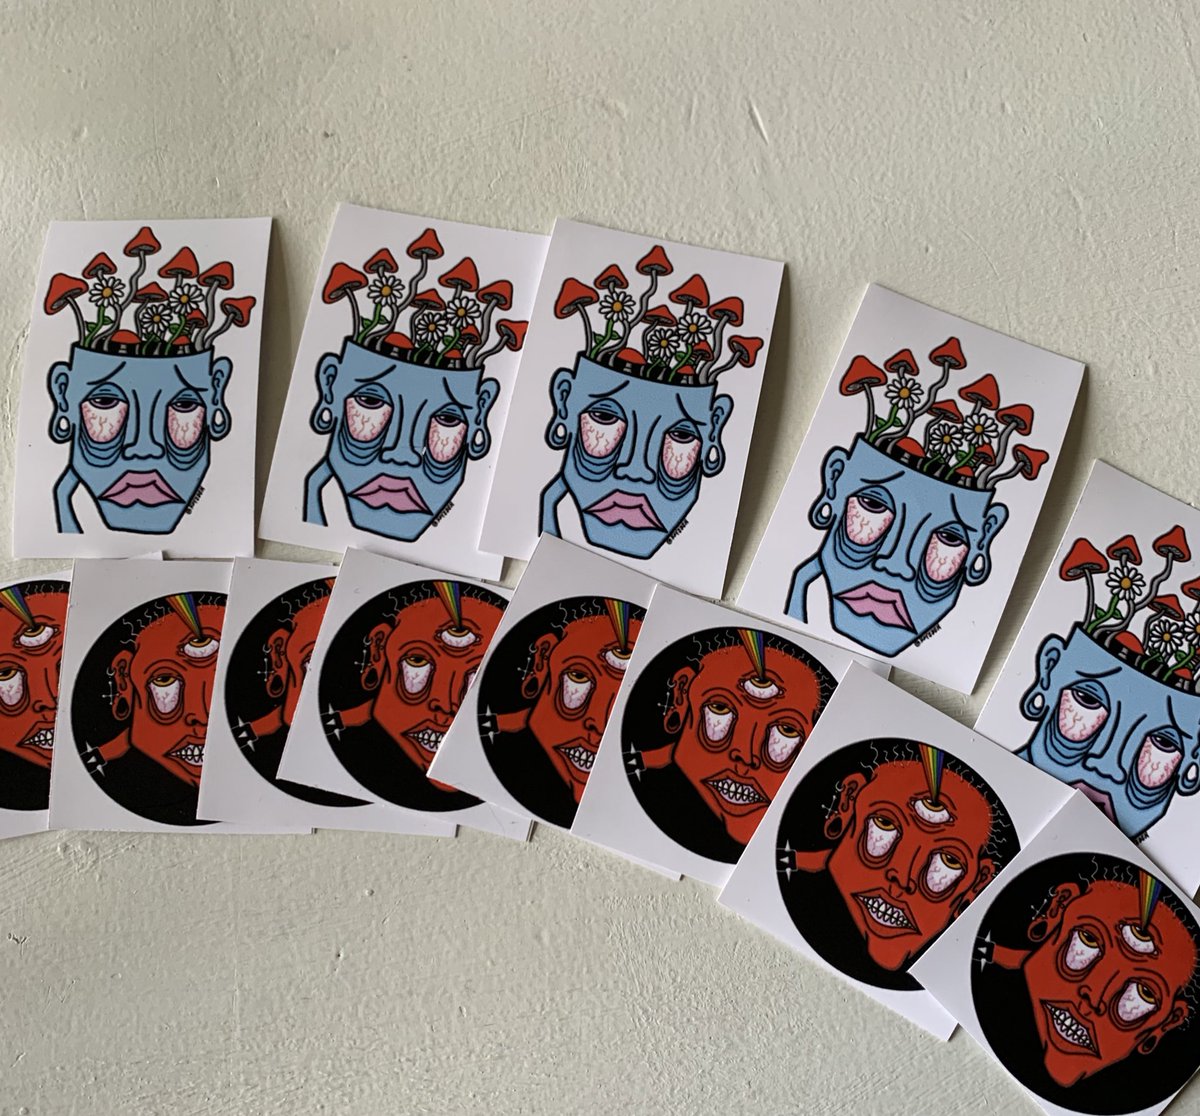 I finally made stickers!!! I will now be including 1 free sticker with every print purchase! I also have more sticker designs ready so I will be selling sticker packs soon! 🖤
#art #artstickers #HorrorArt